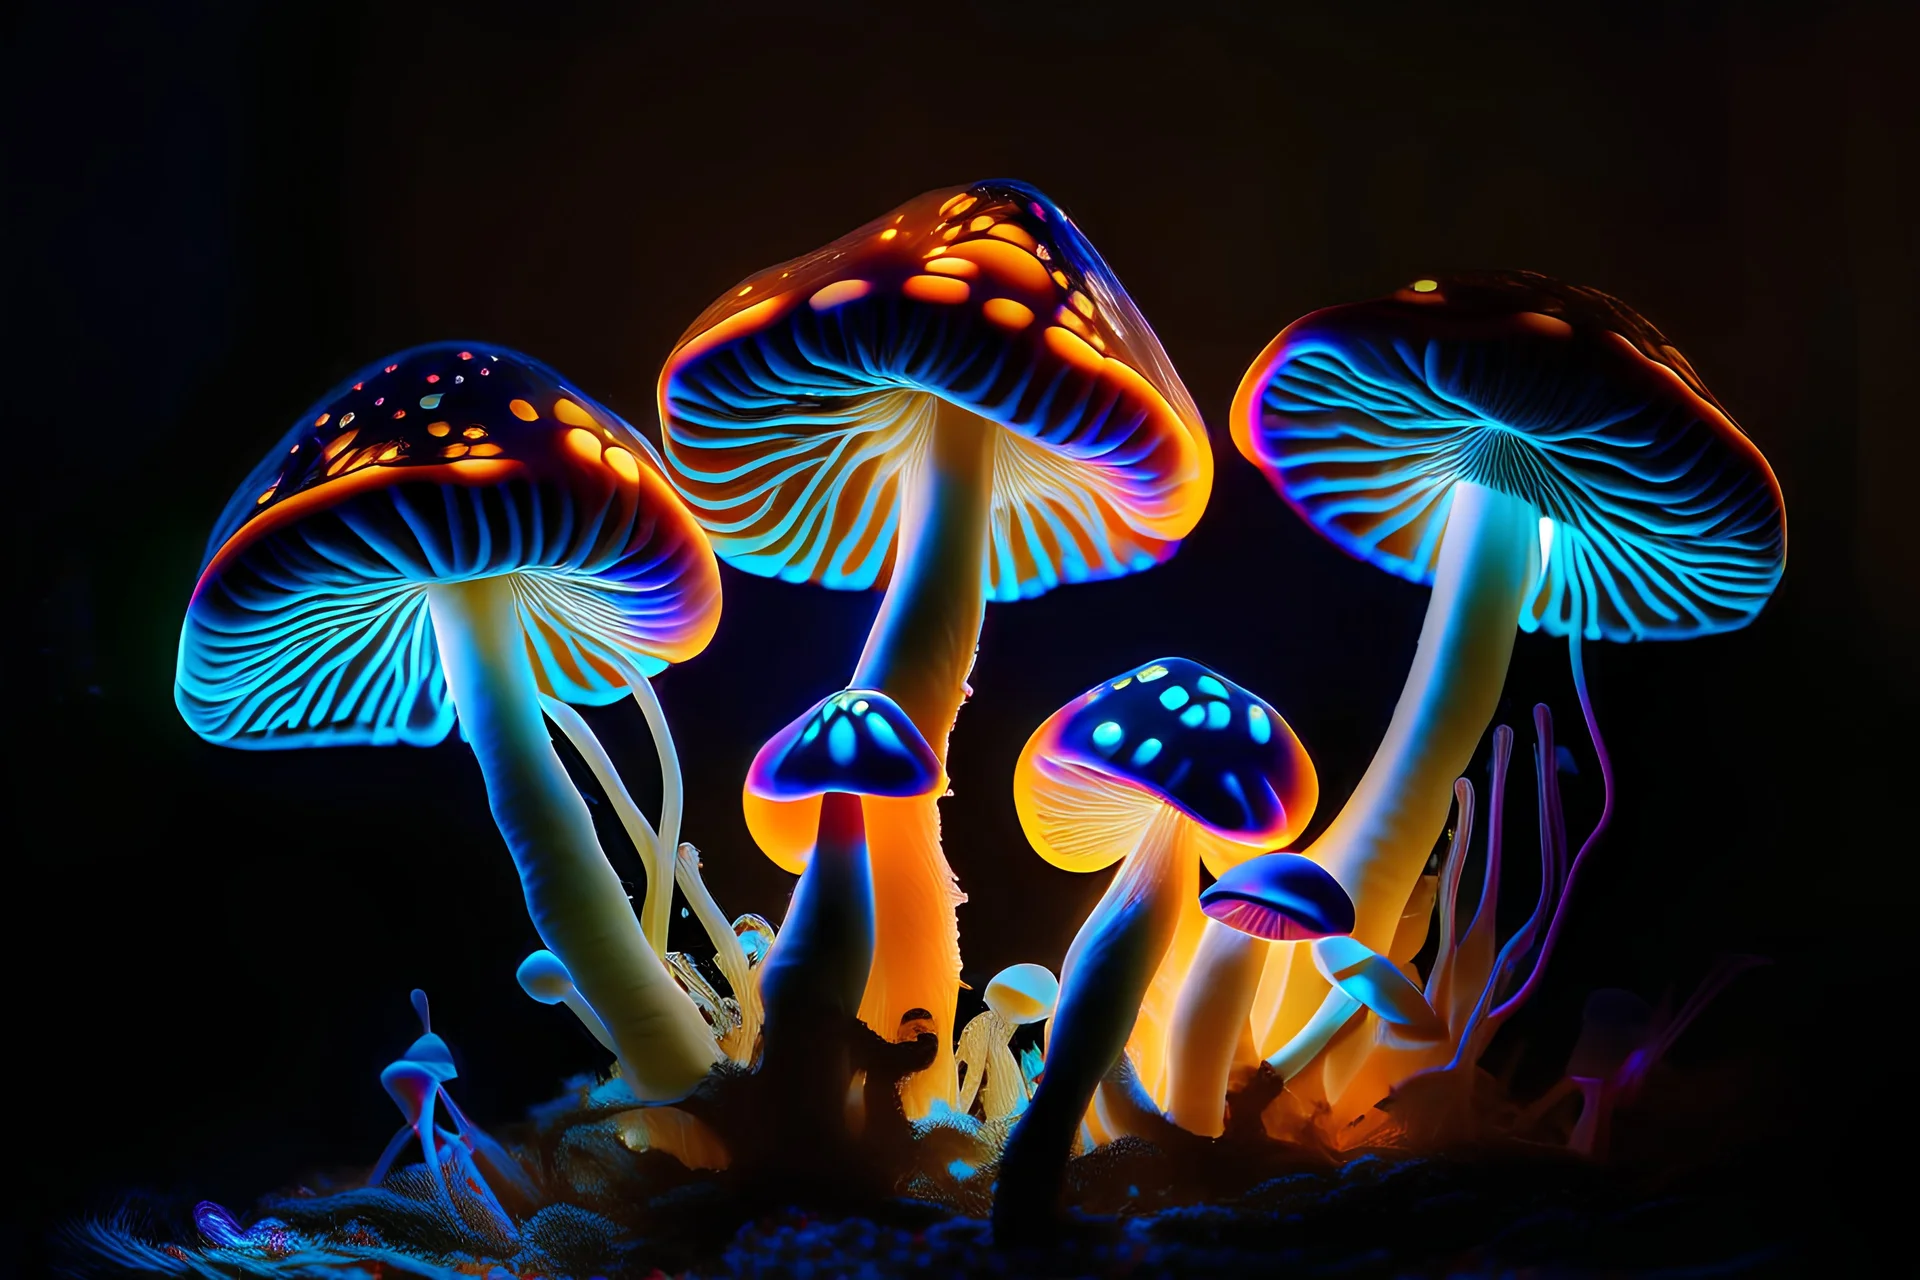 colorful mushrooms with glowing gills in rembrandt lighting on dark background